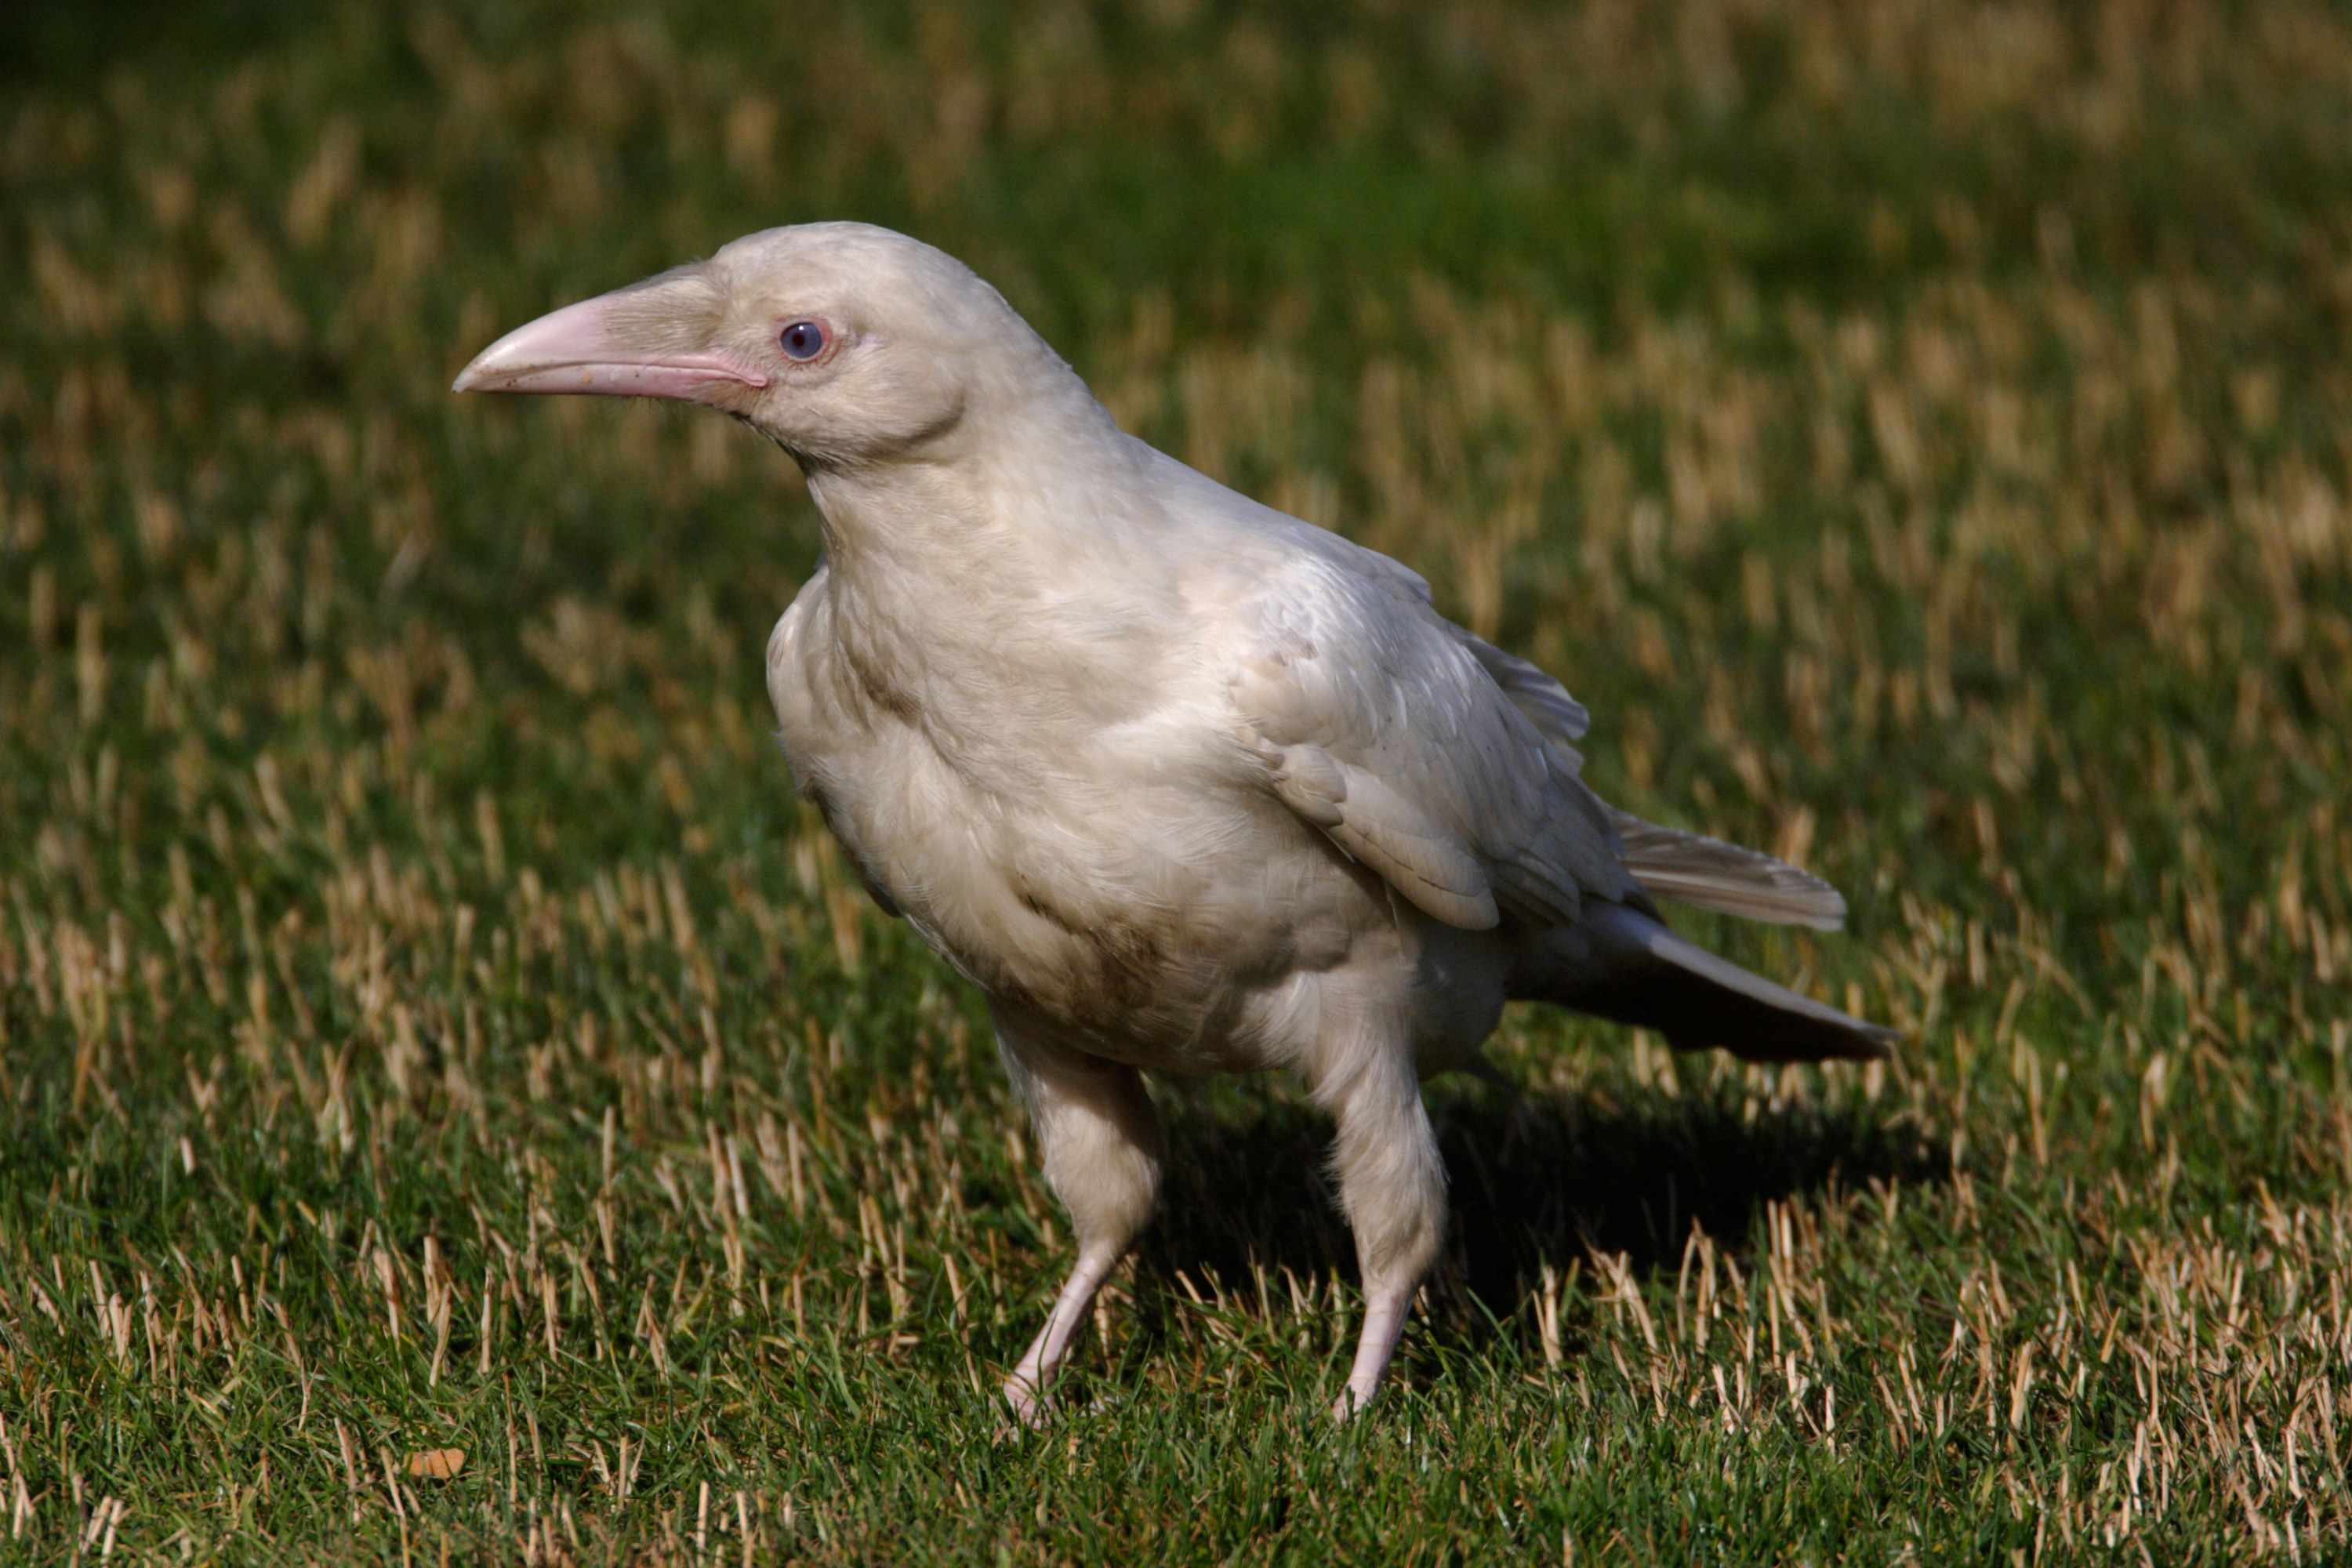 An extremely rare, all white raven